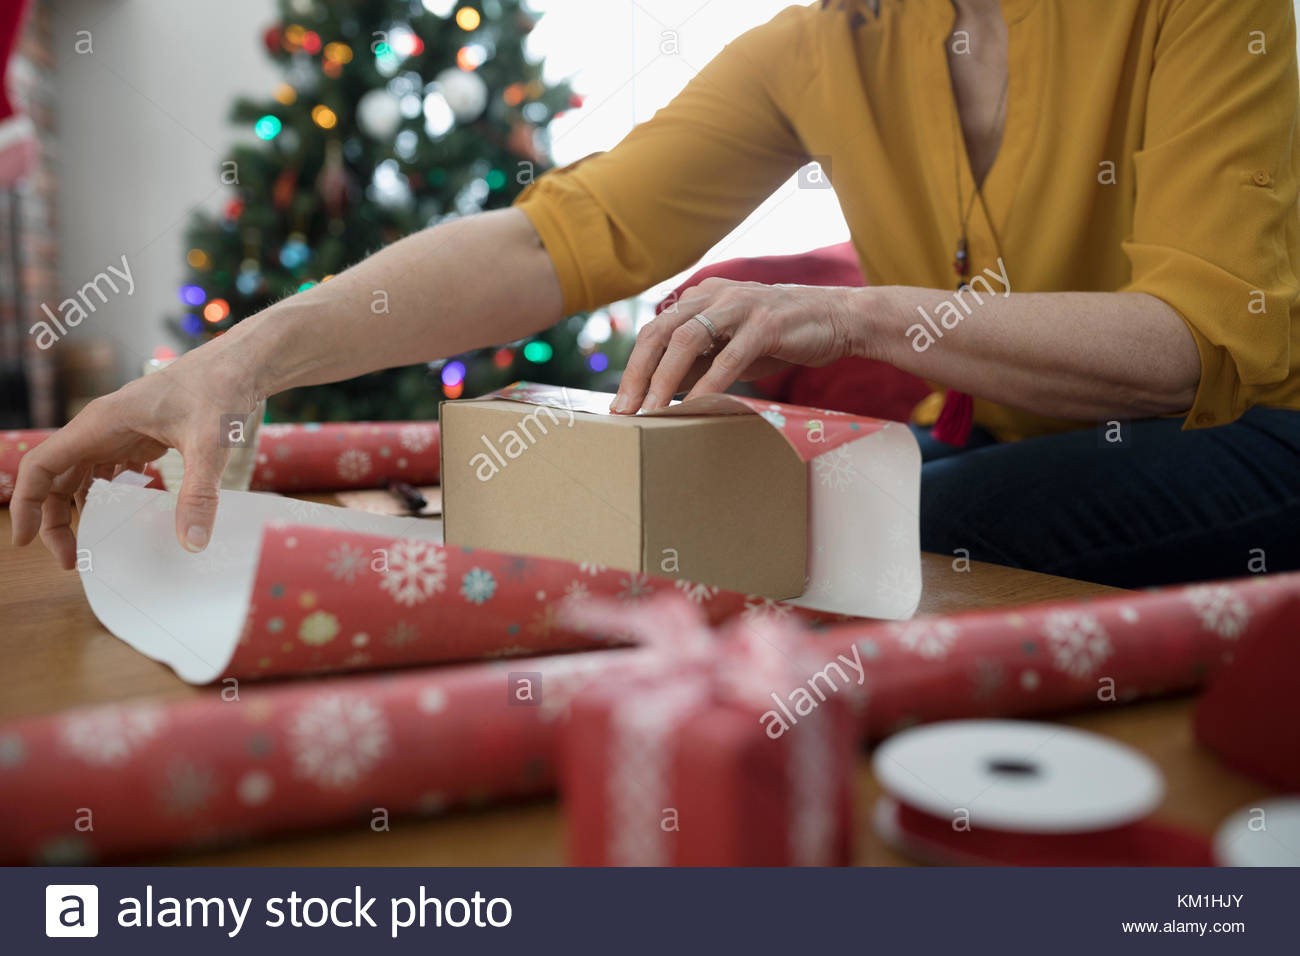 Woman wrapping Christmas gift with wrapping paper Stock Photo